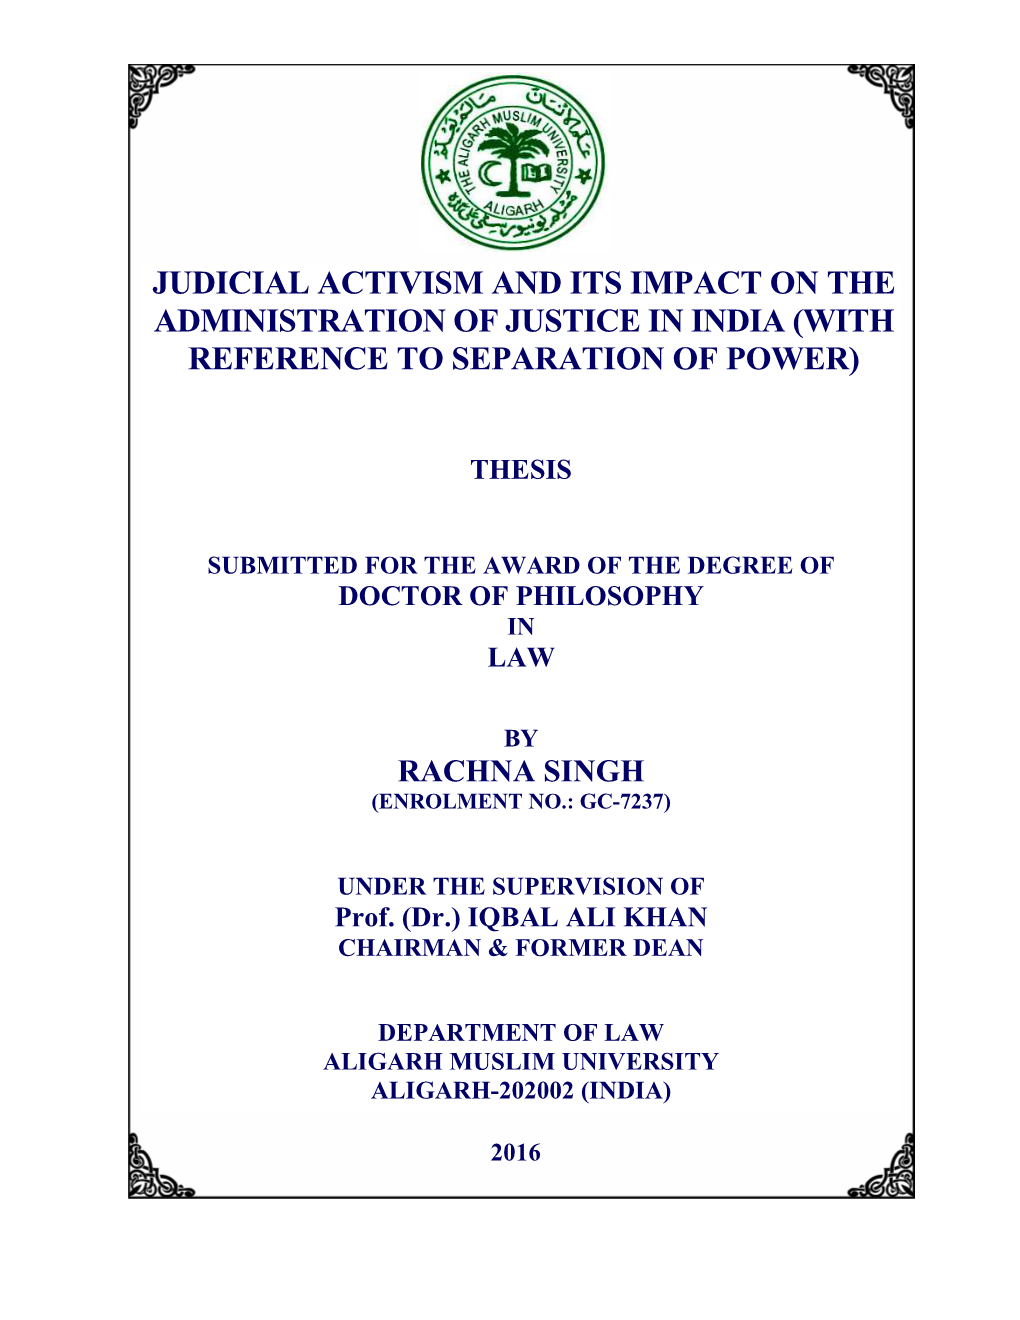 Judicial Activism and Its Impact on the Administration of Justice in India (With Reference to Separation of Power)